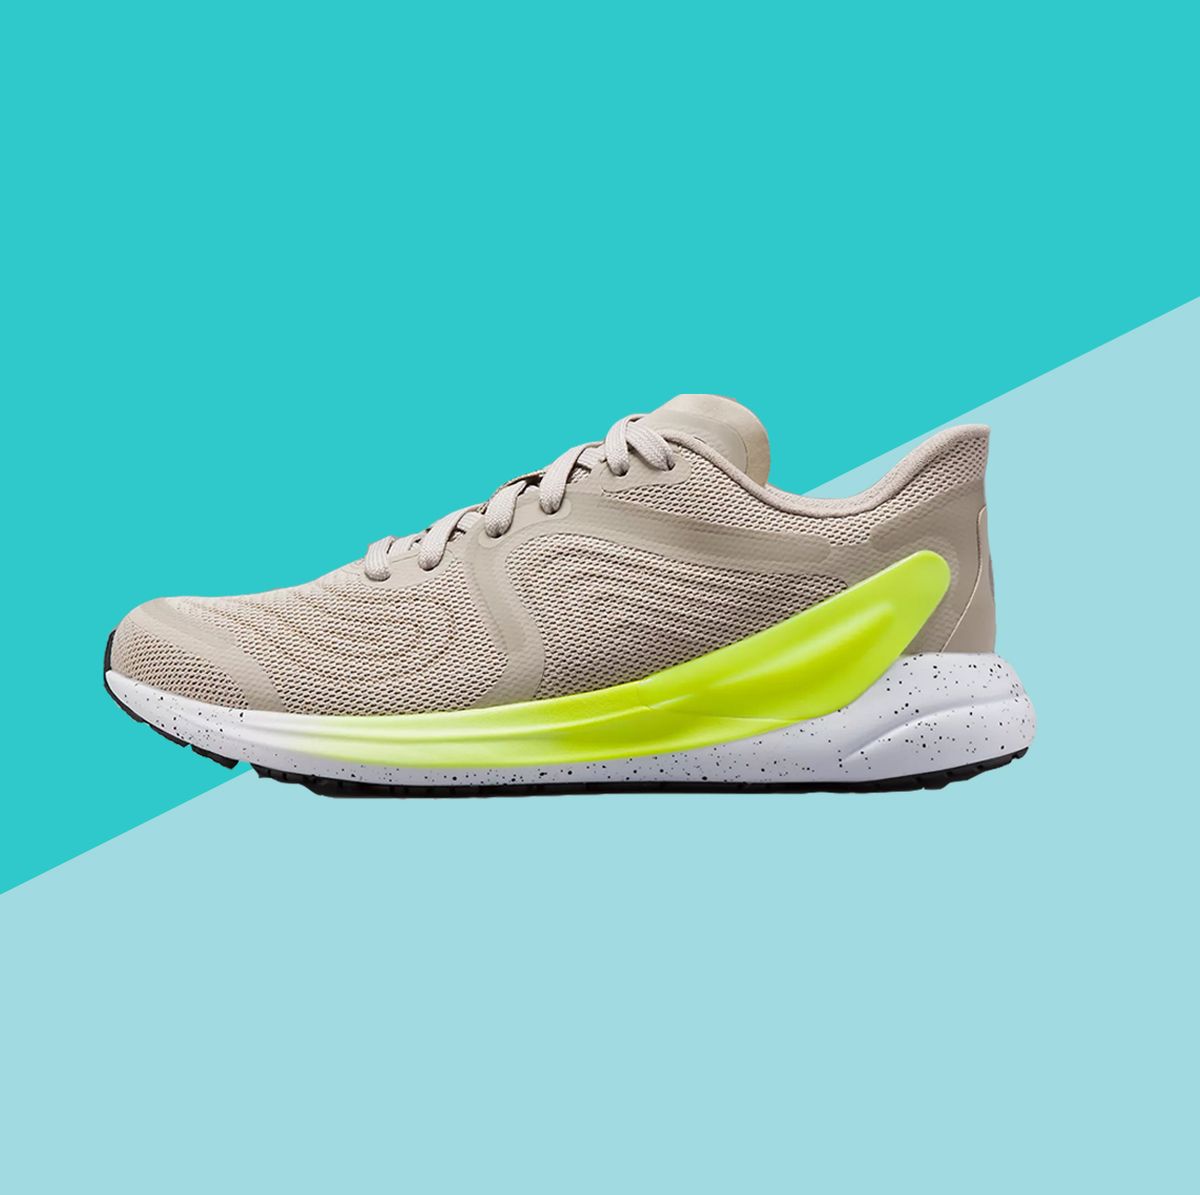 Lululemon Just Launched the Blissfeel 2 Running Shoes and It's